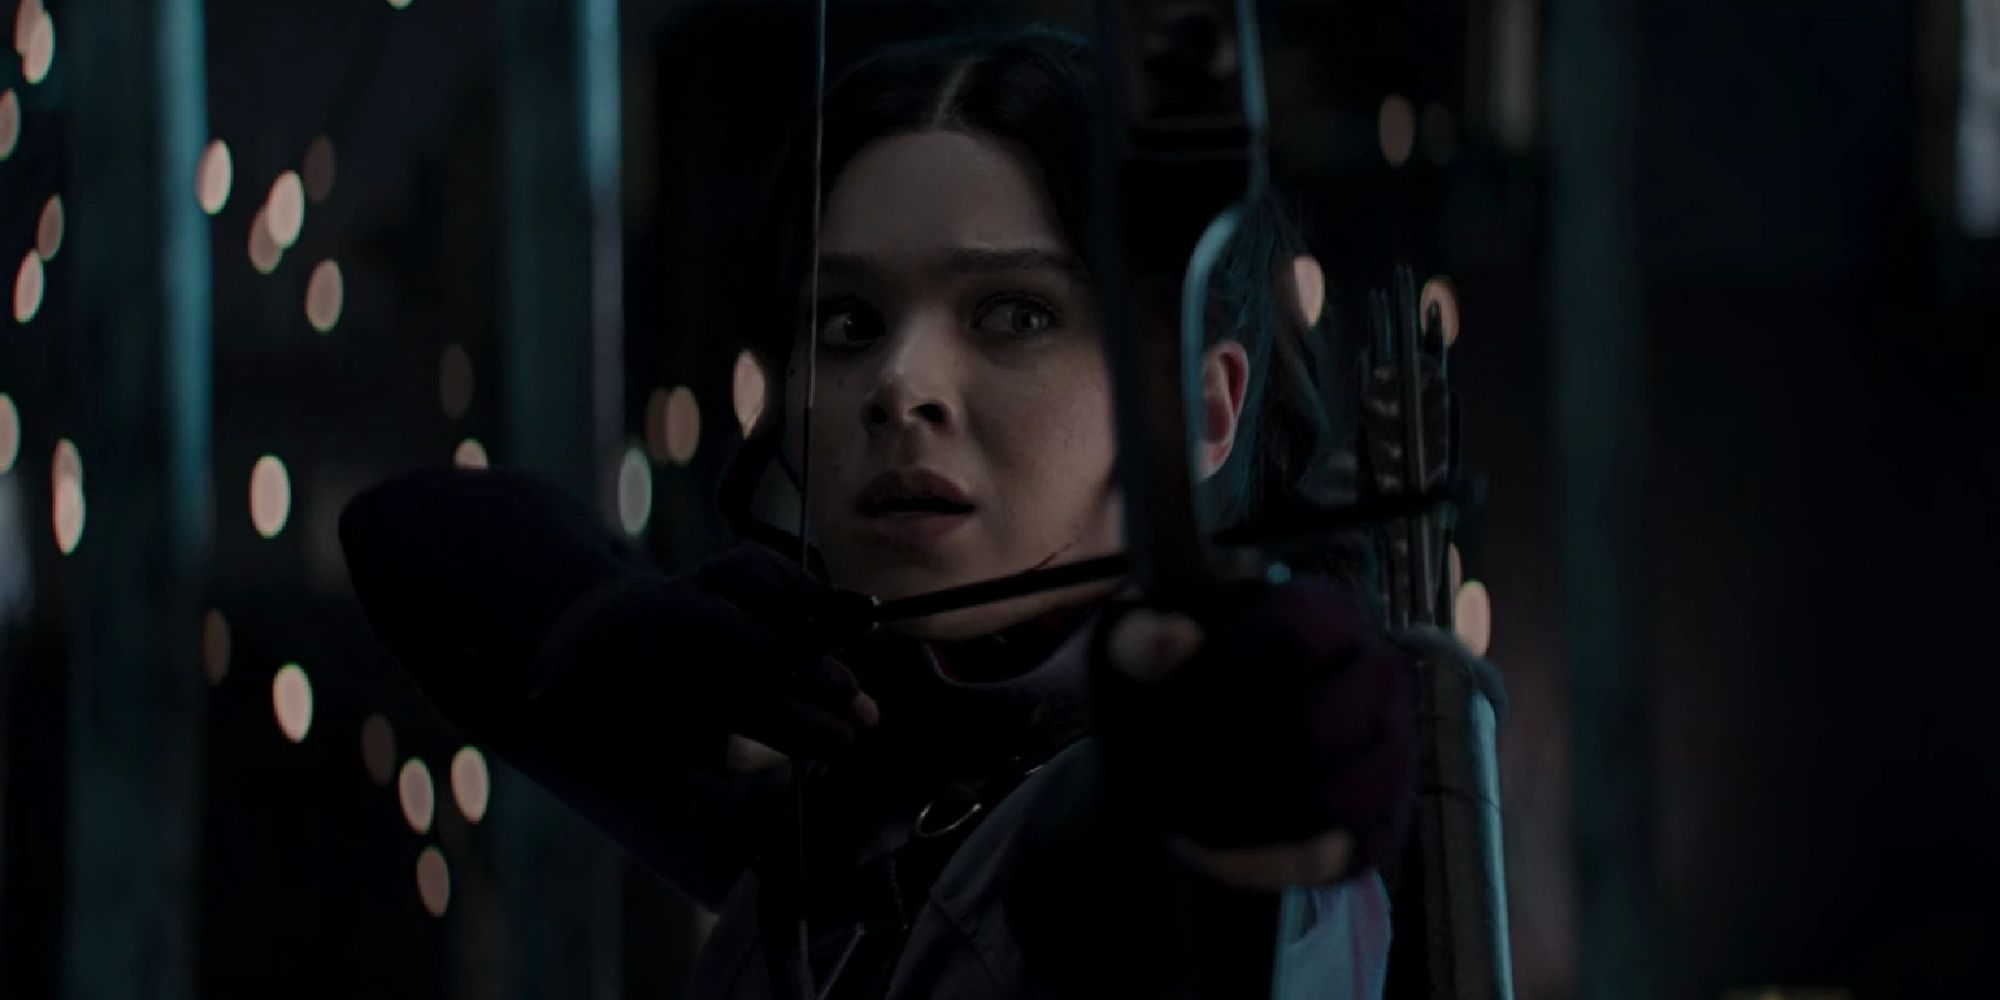 Kate Bishop looking worried as she aims her bow and arrow in Hawkeye